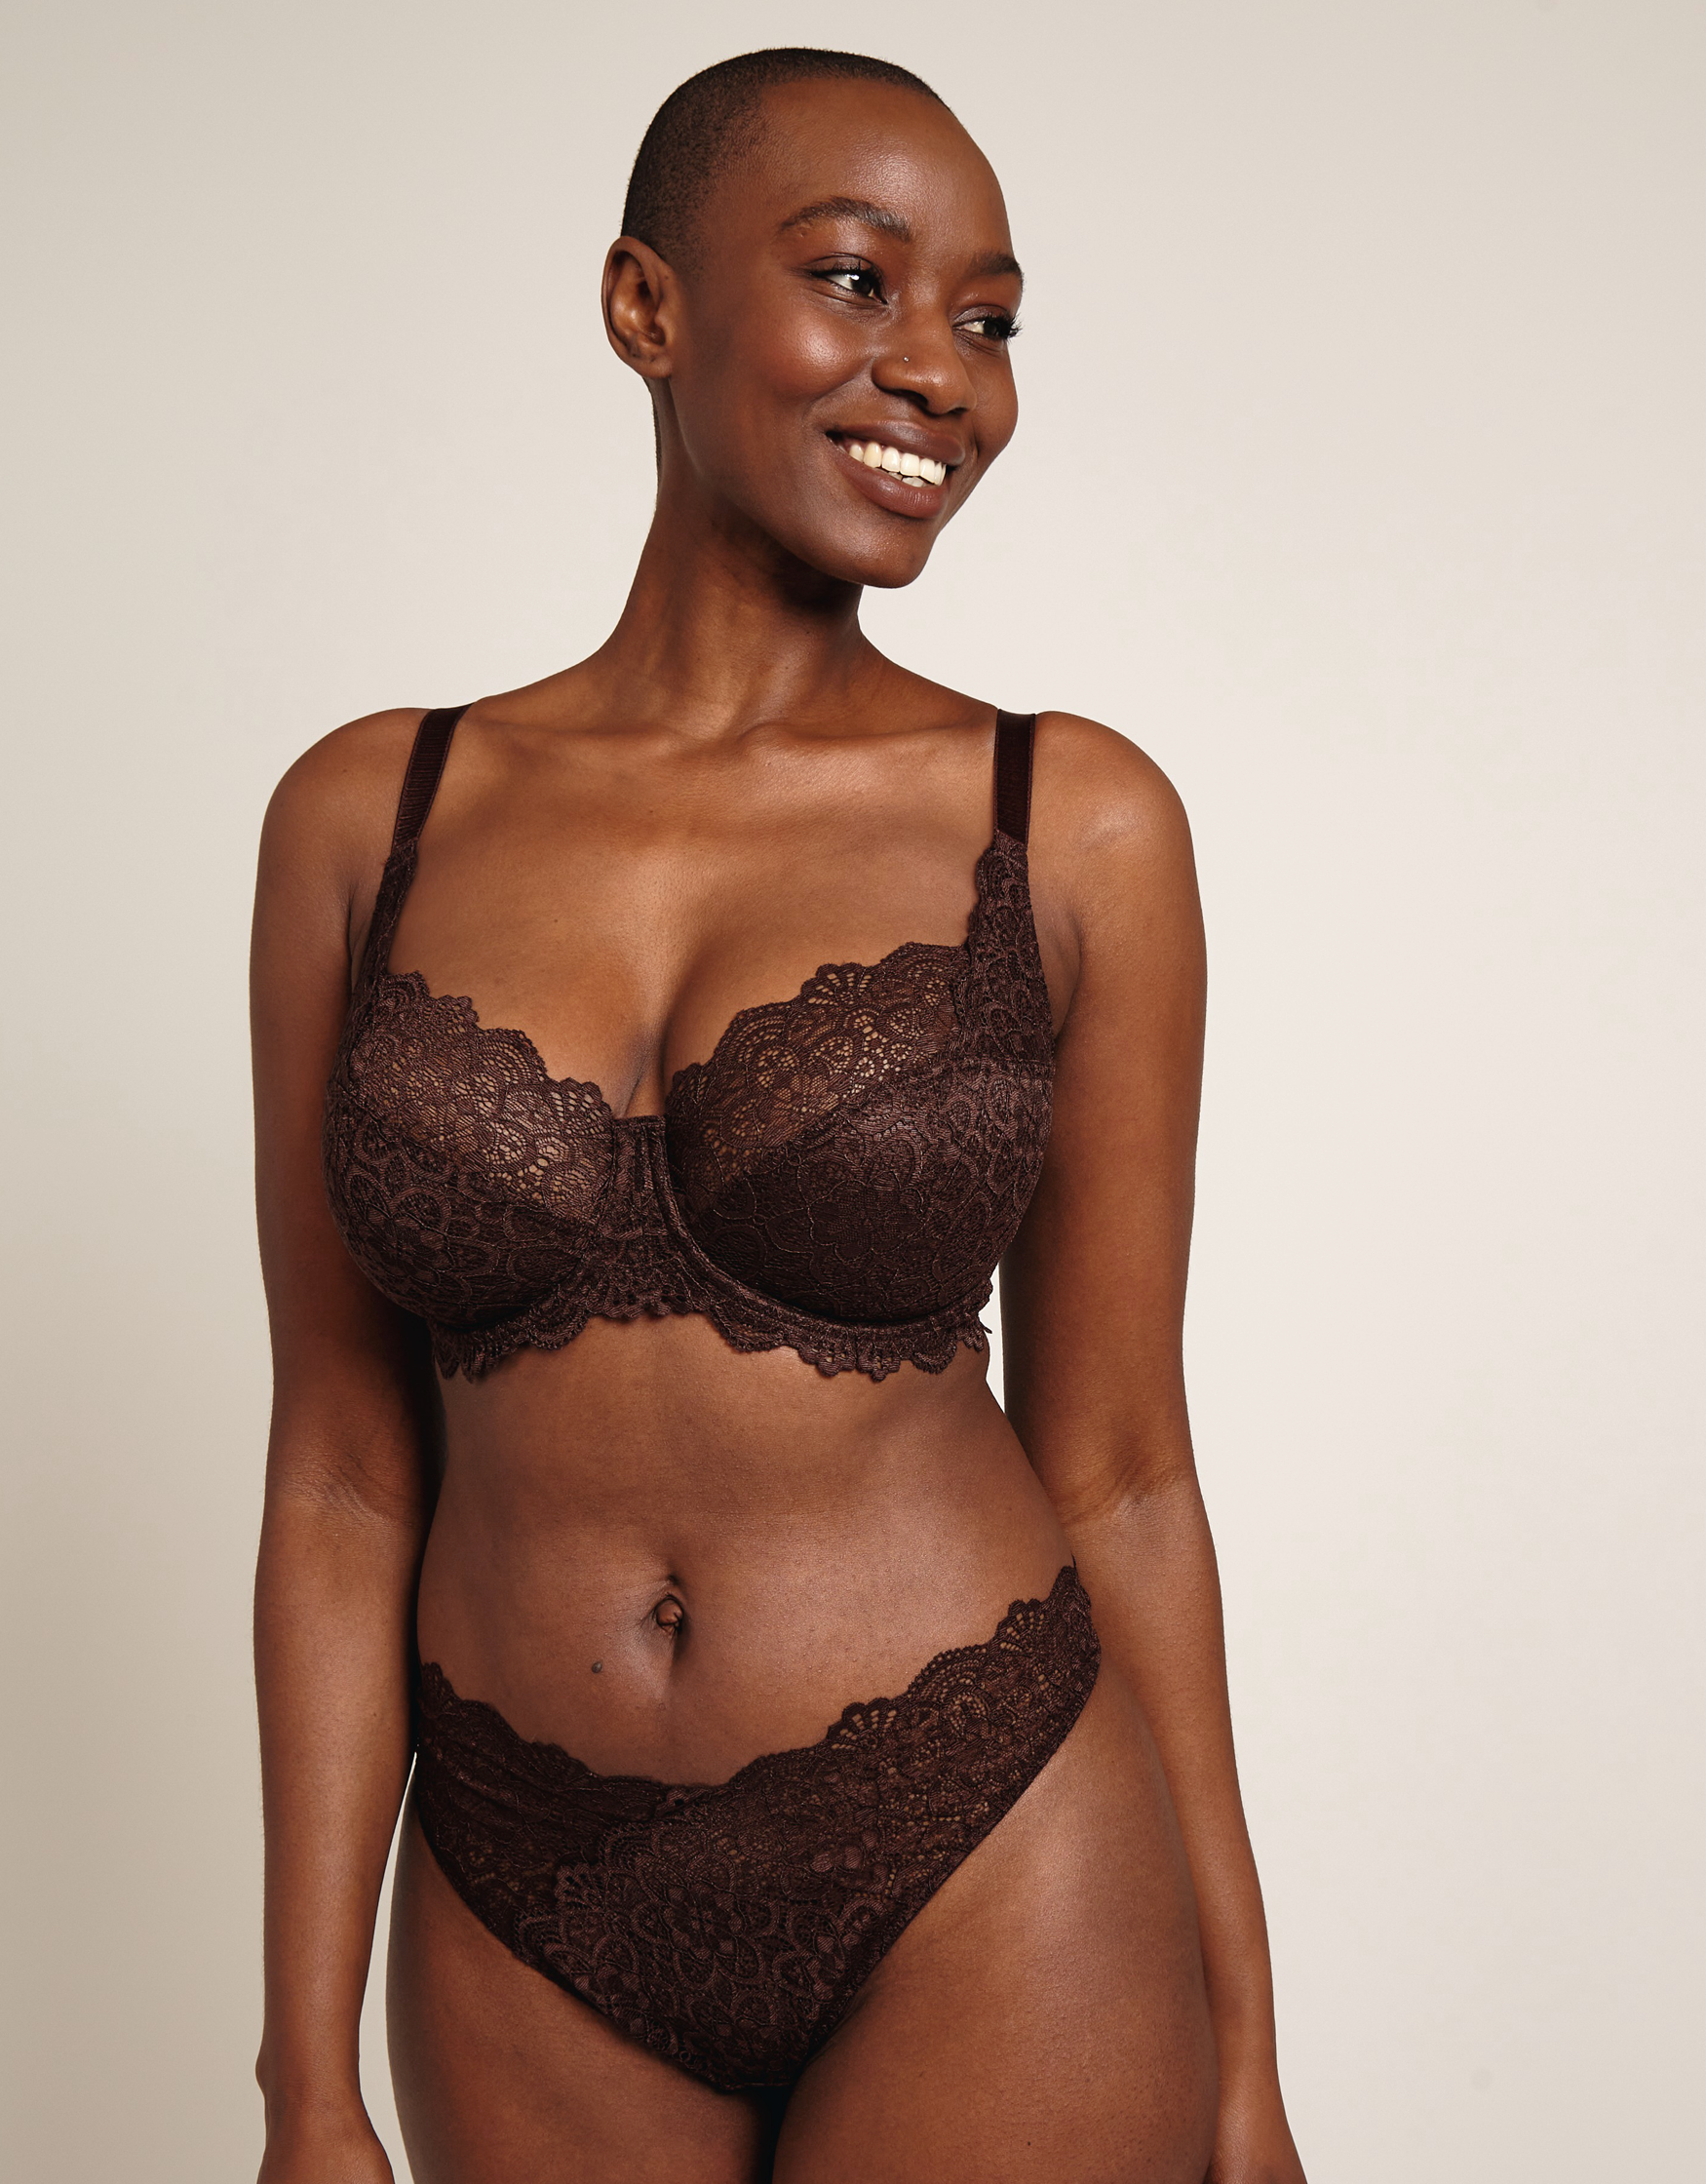 Side Support Bras  Bras with Side Support Panels in a D-L Cup